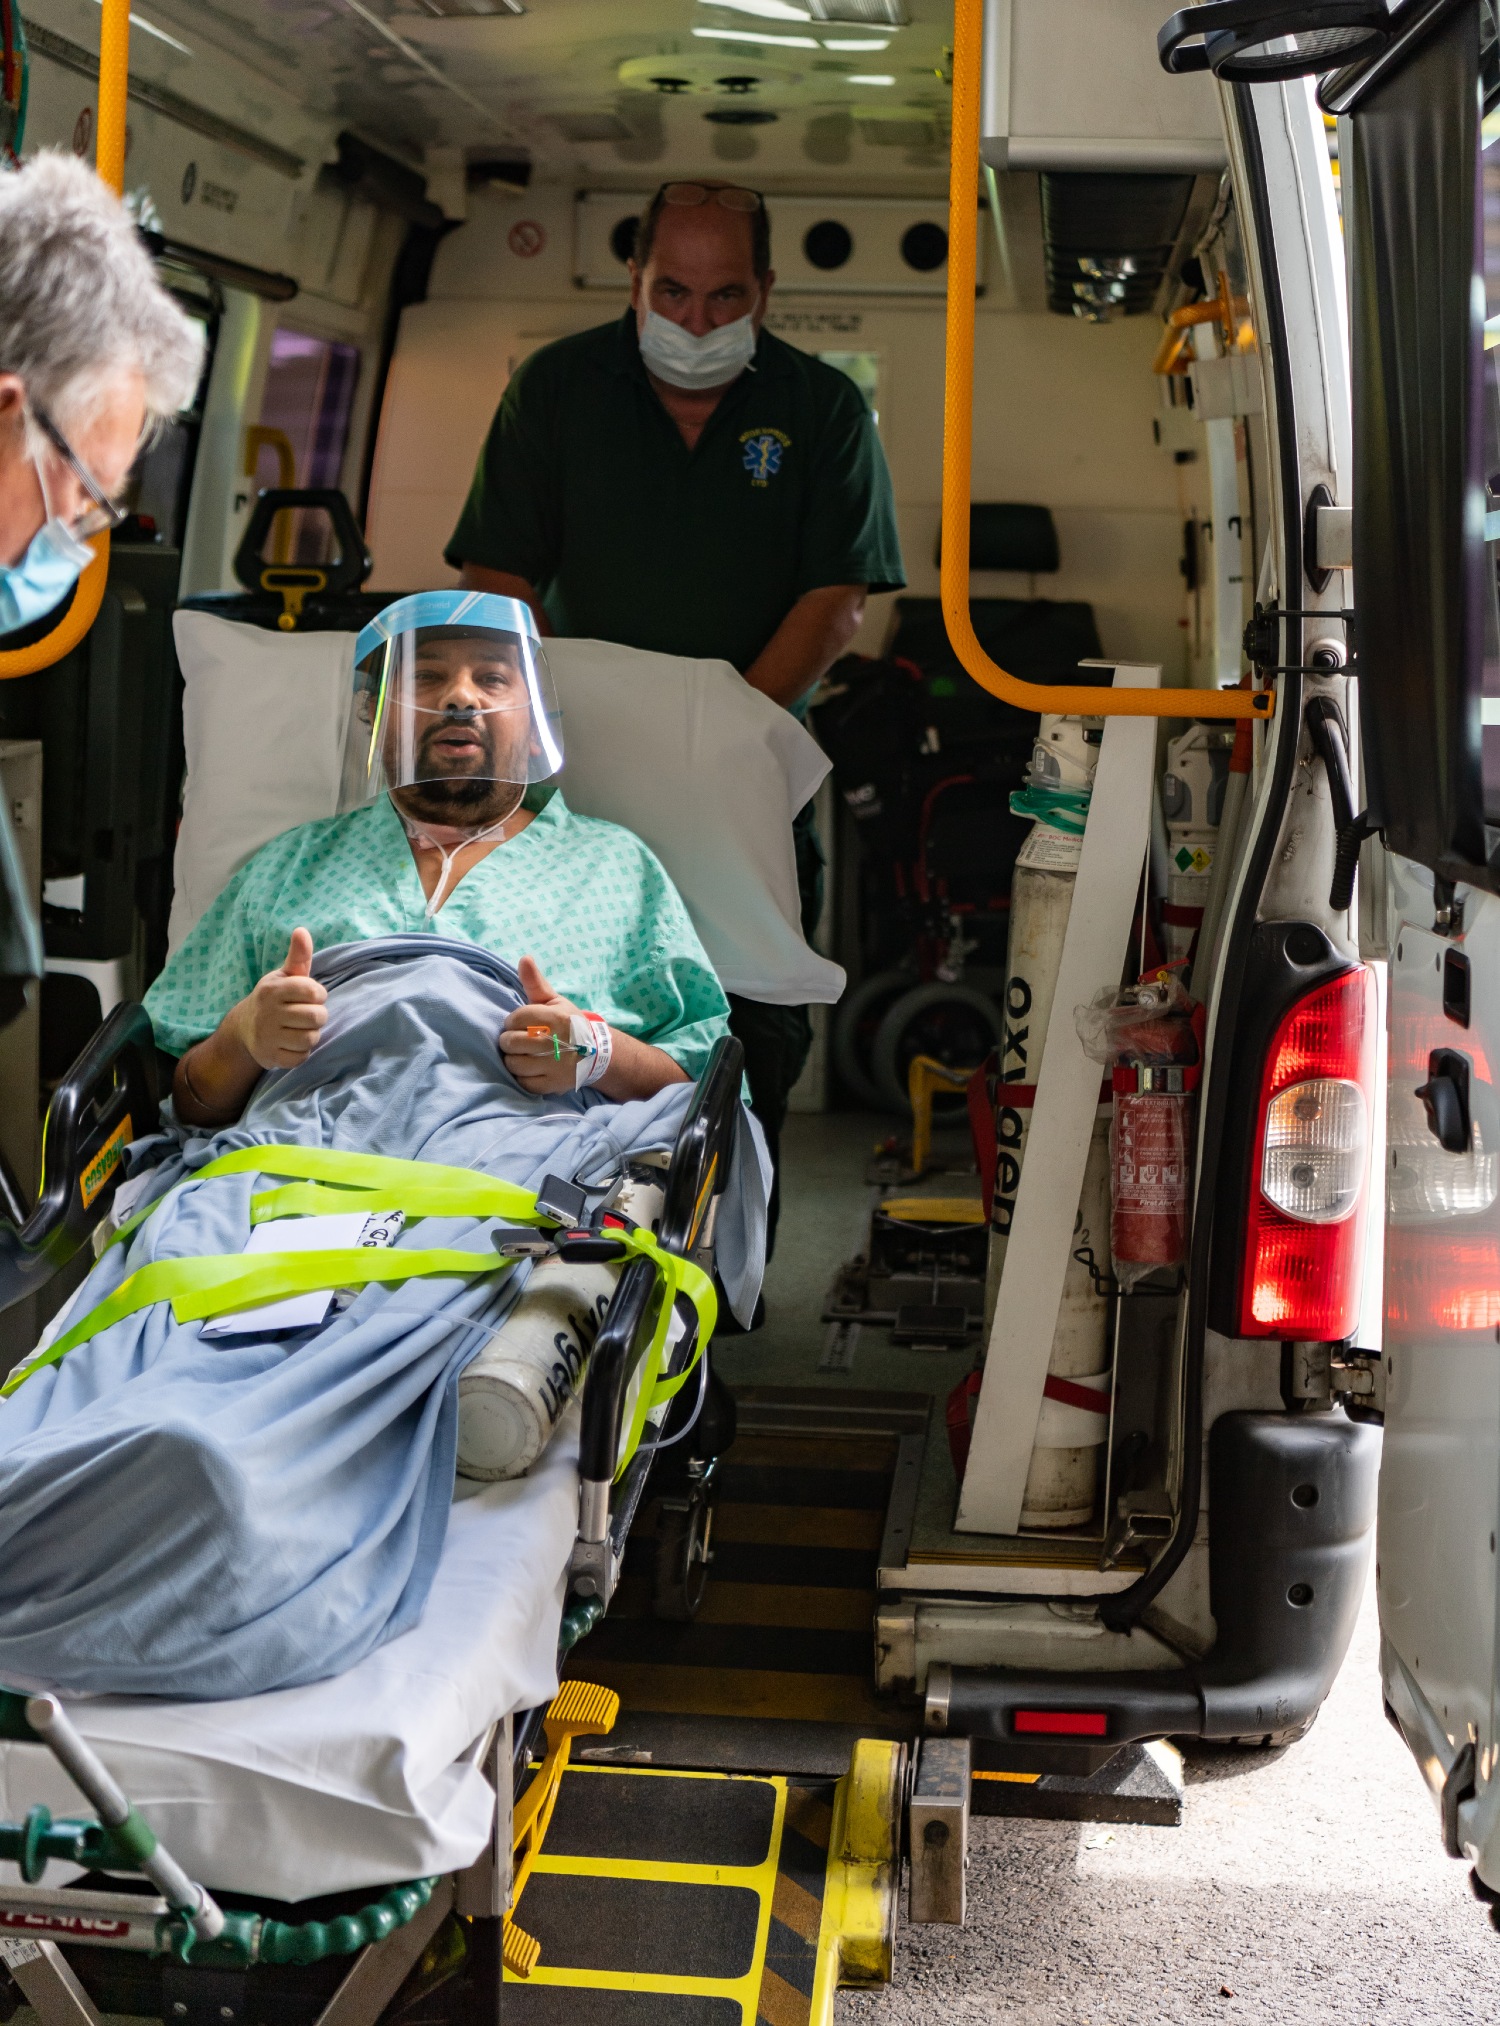 A patient in a bed is wheeled into the back of an ambulance by staff in green uniforms. 